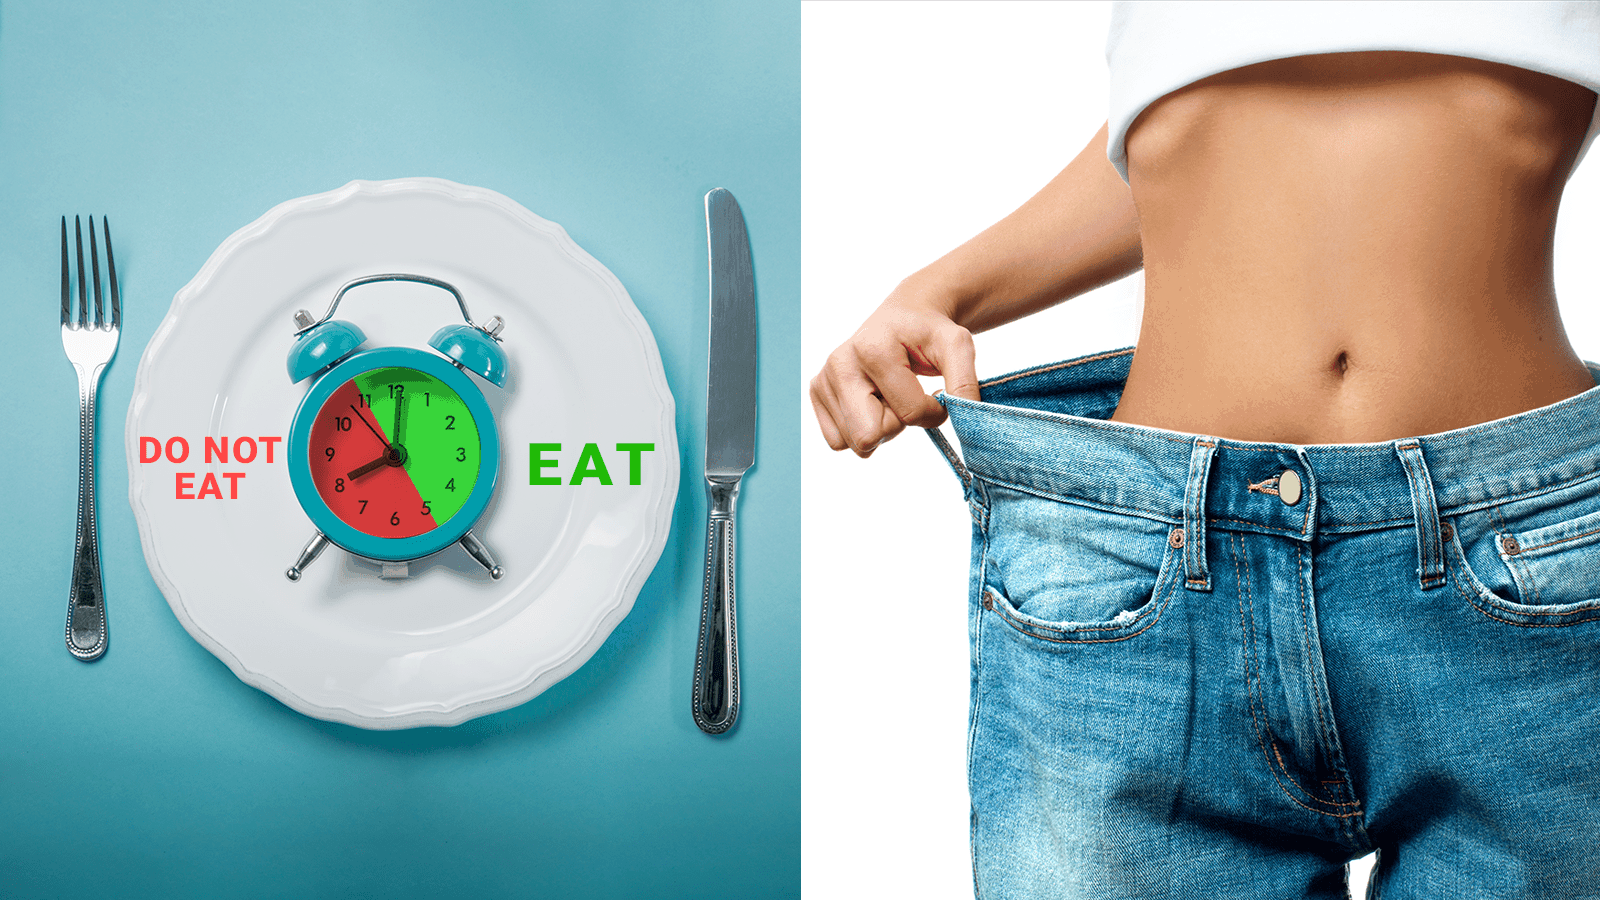 weight loss with intermittent fasting